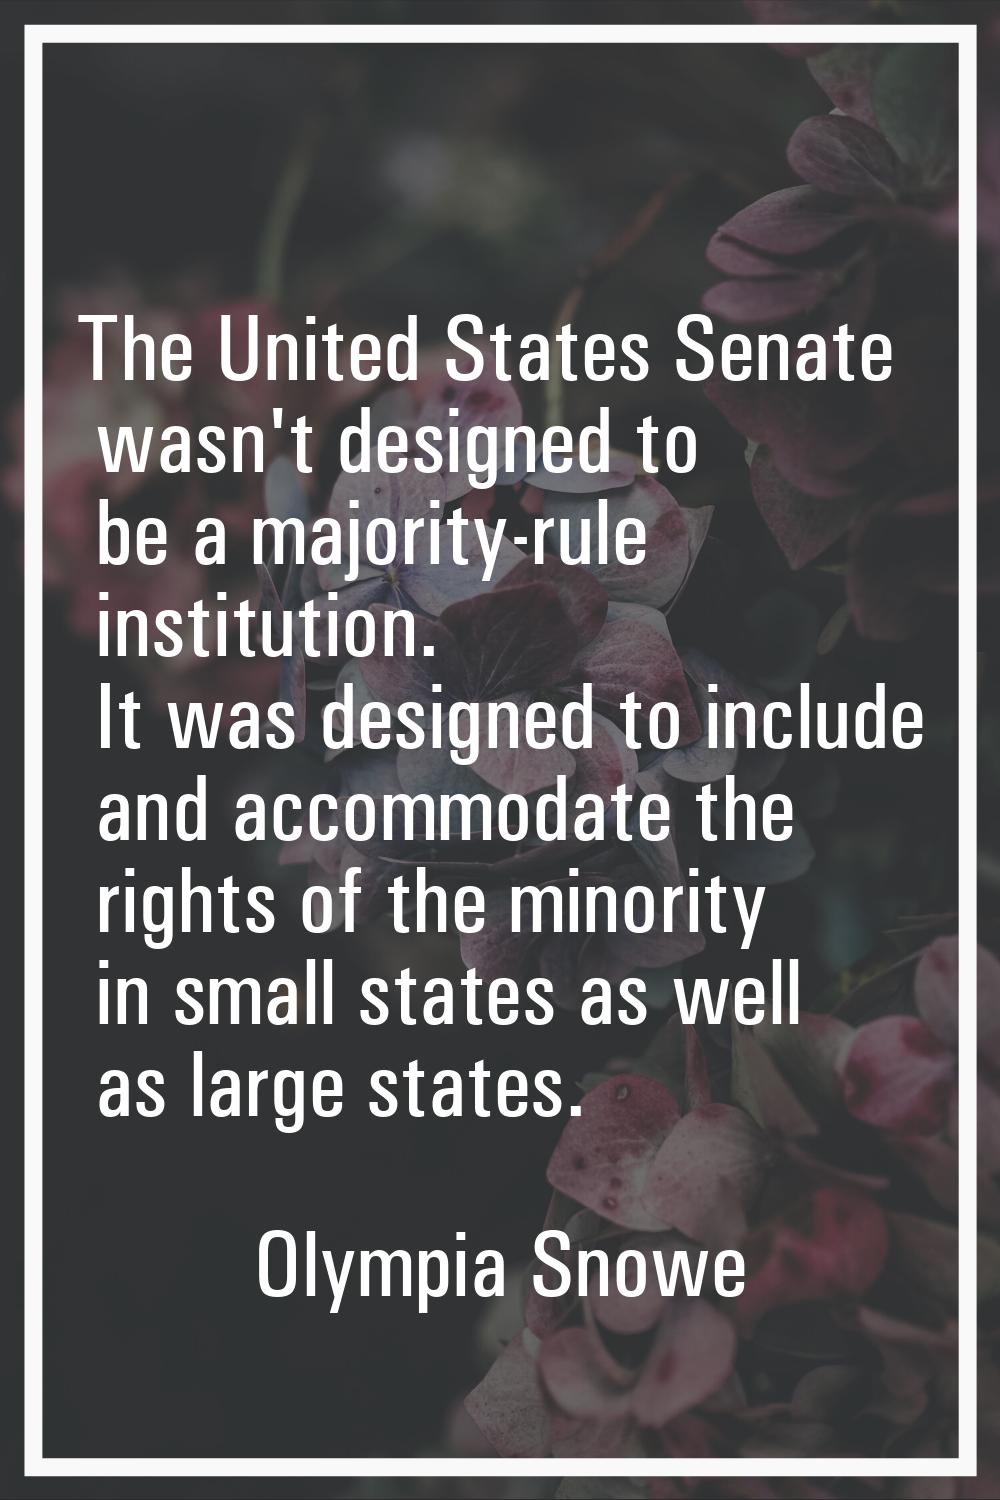 The United States Senate wasn't designed to be a majority-rule institution. It was designed to incl